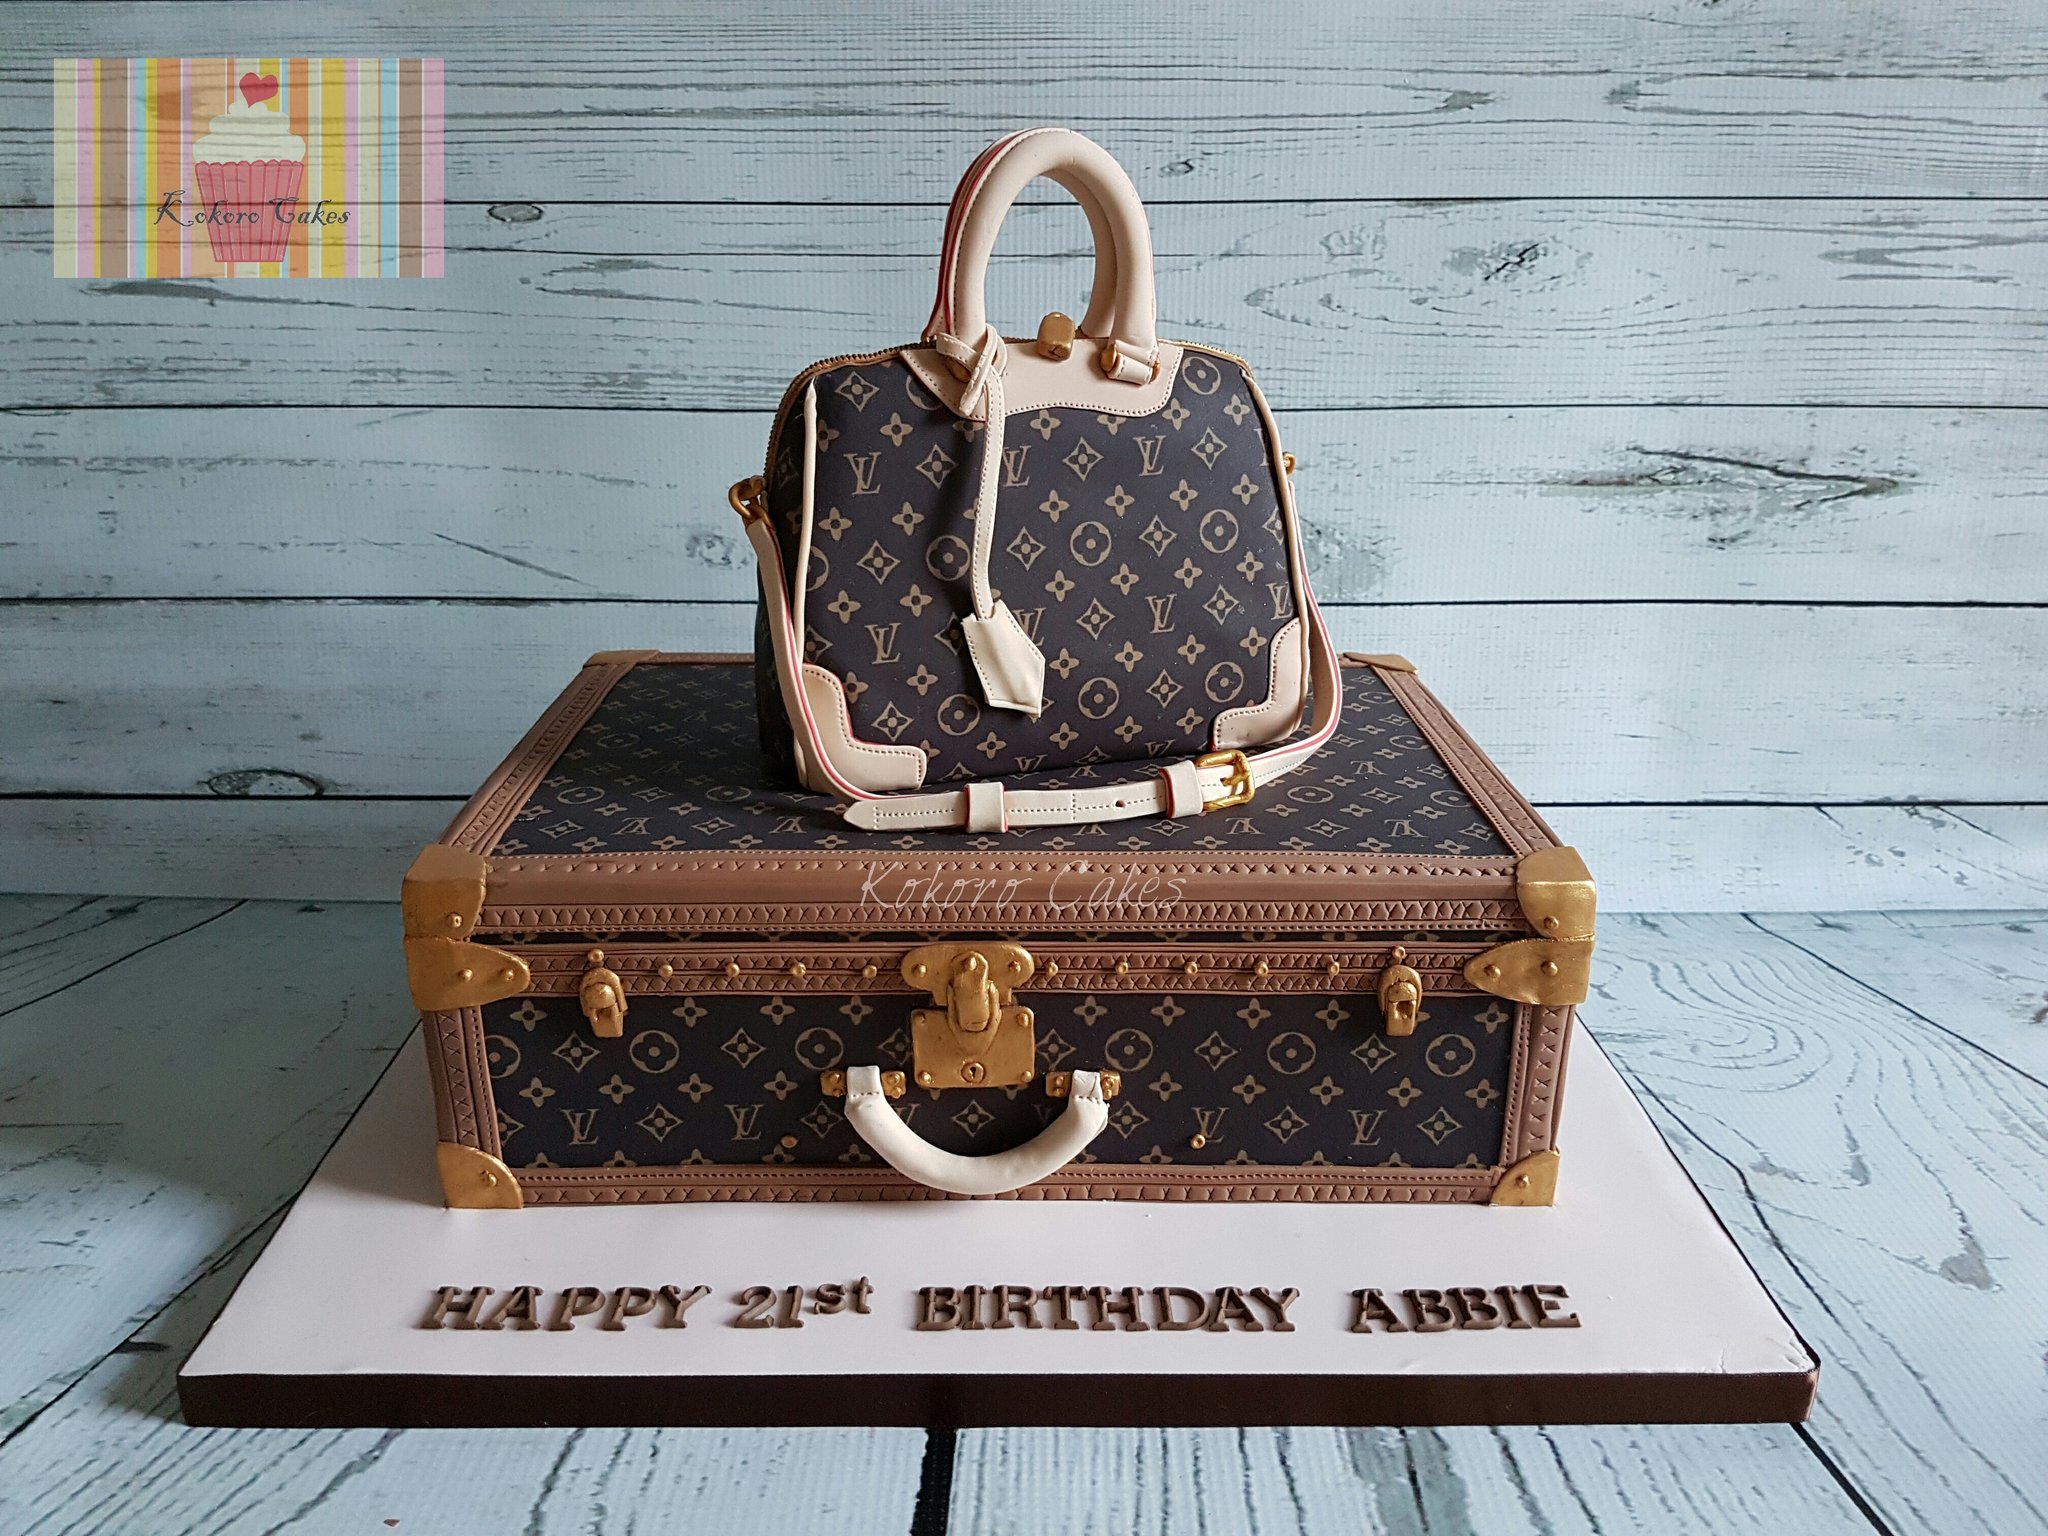 Louis Vuitton Holdall - Decorated Cake by Nichola - CakesDecor